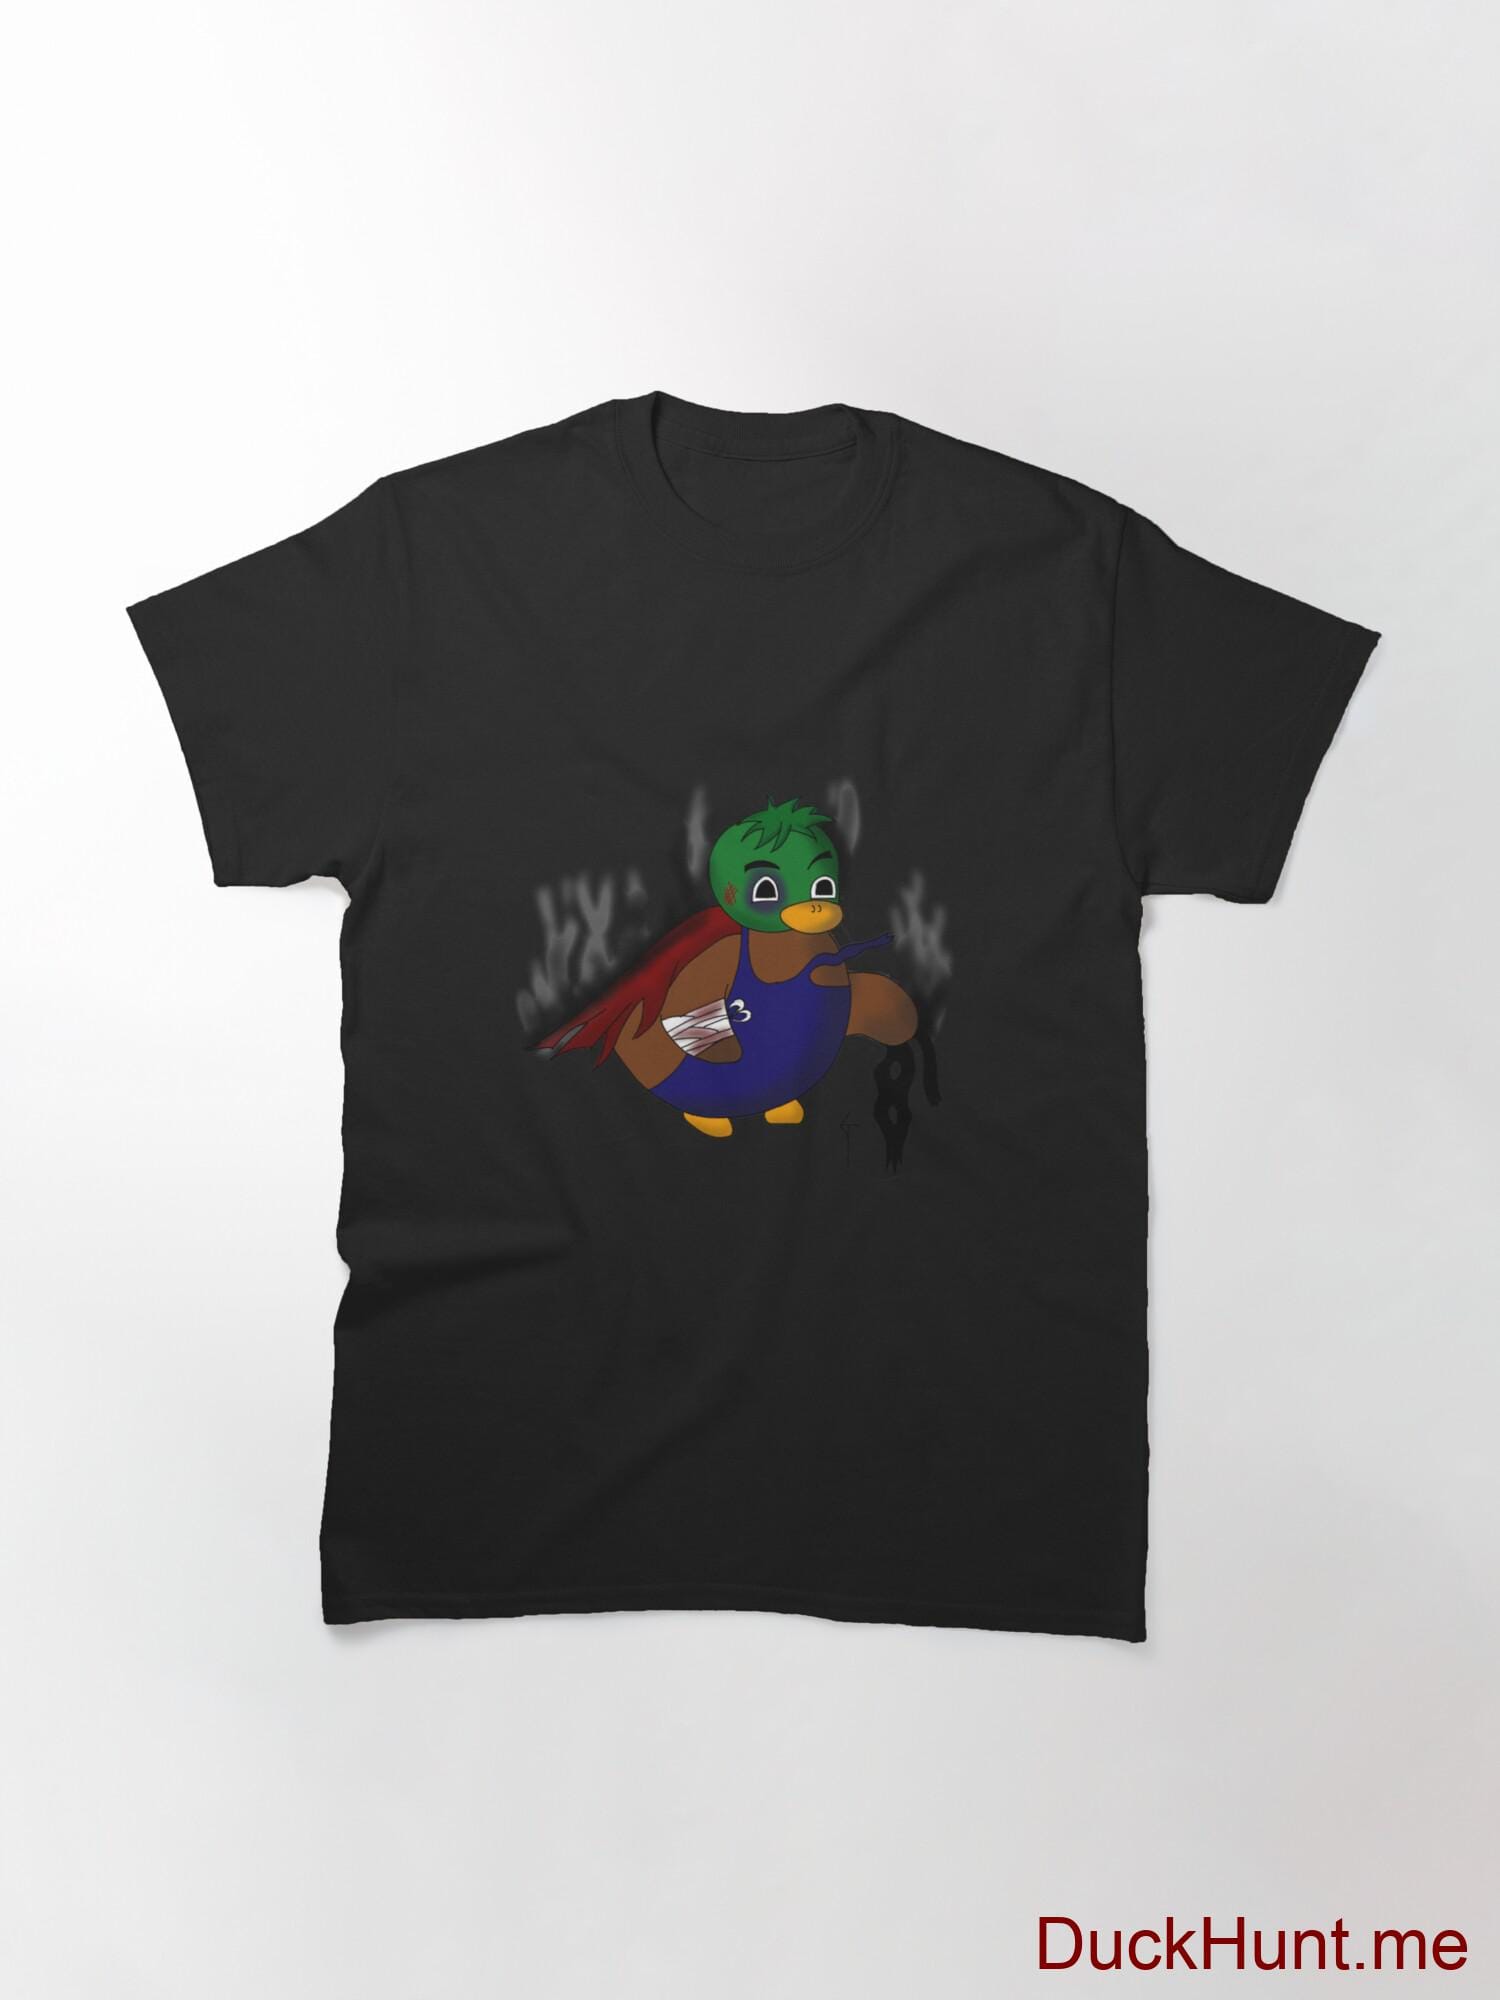 Dead Boss Duck (smoky) Black Classic T-Shirt (Front printed) alternative image 2